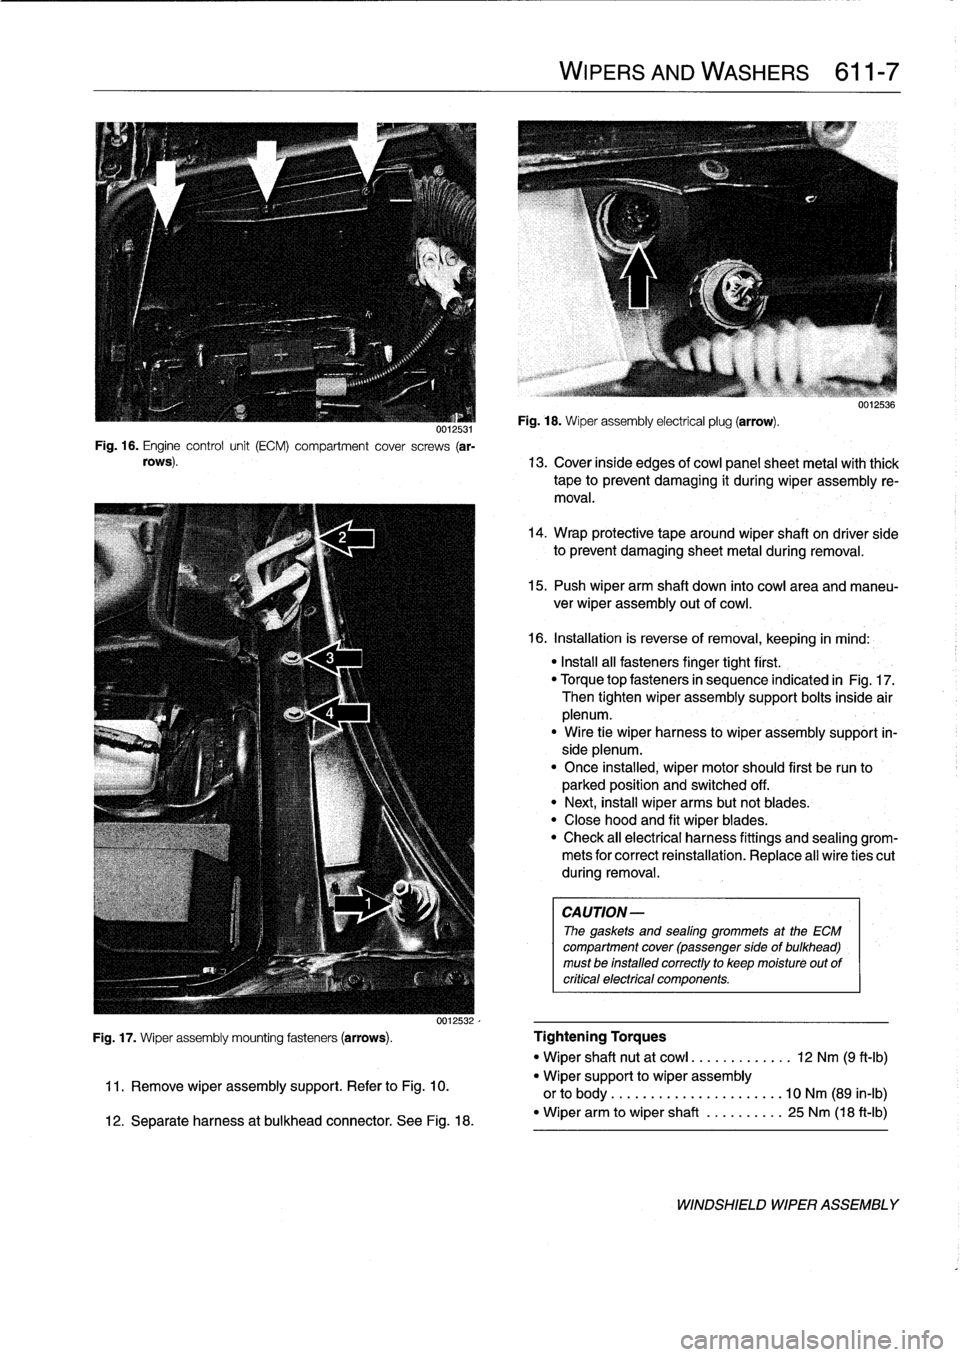 BMW M3 1995 E36 Workshop Manual 
0012531Fig
.
16
.
Engine
control
unit
(ECM)
compartment
cover
screws
(ar-
rows)
.

WIPERS
AND
WASHERS

	

611-
7

Fig
.
18
.
Wiper
assembly
electrical
plug
(arrow)
.

uu1zbs6

13
.
Cover
inside
edges